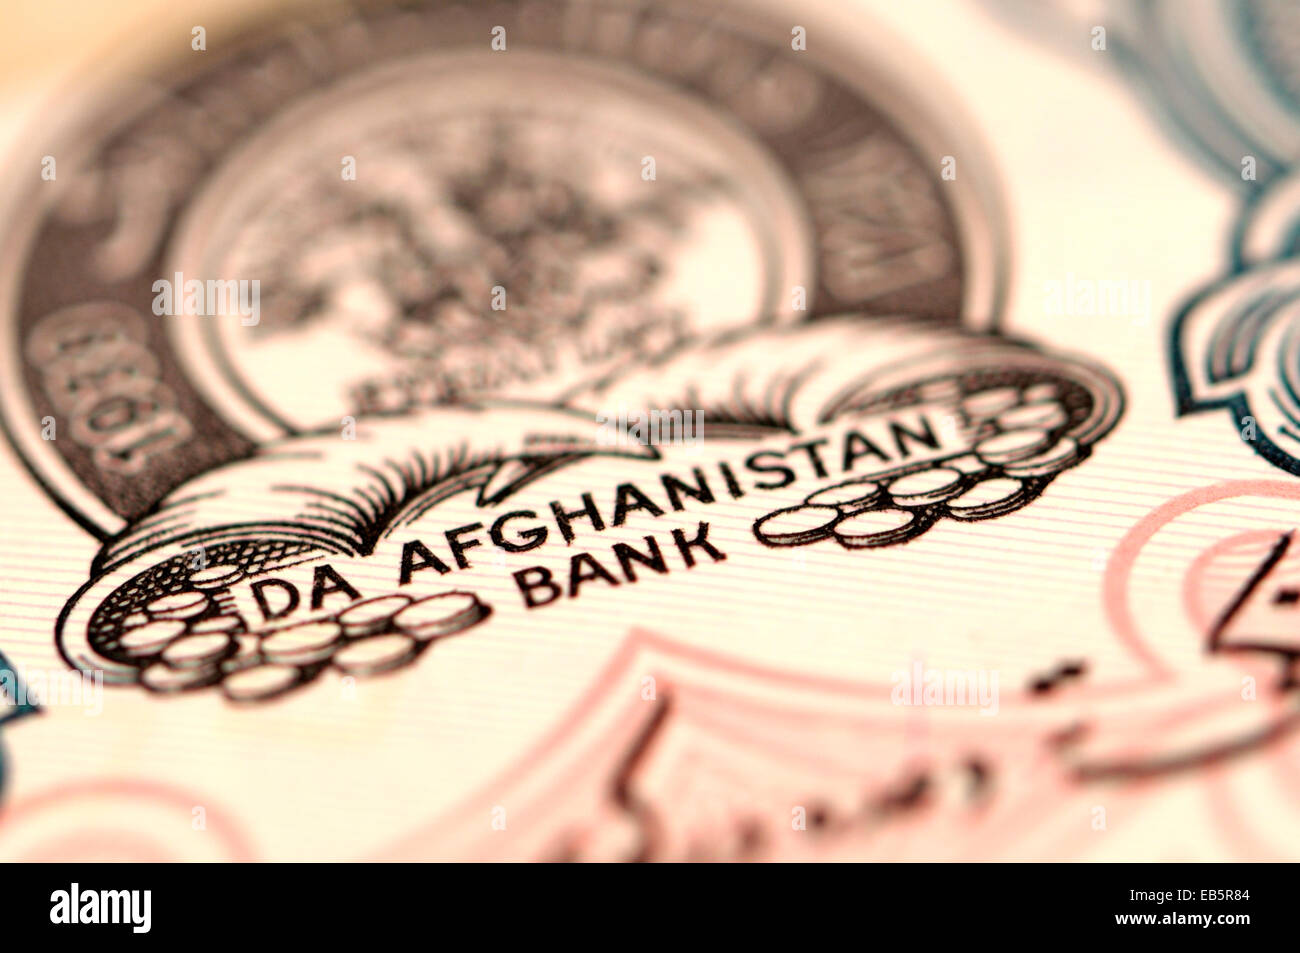 Afghan banknote - the Bank of Afghanistan Stock Photo